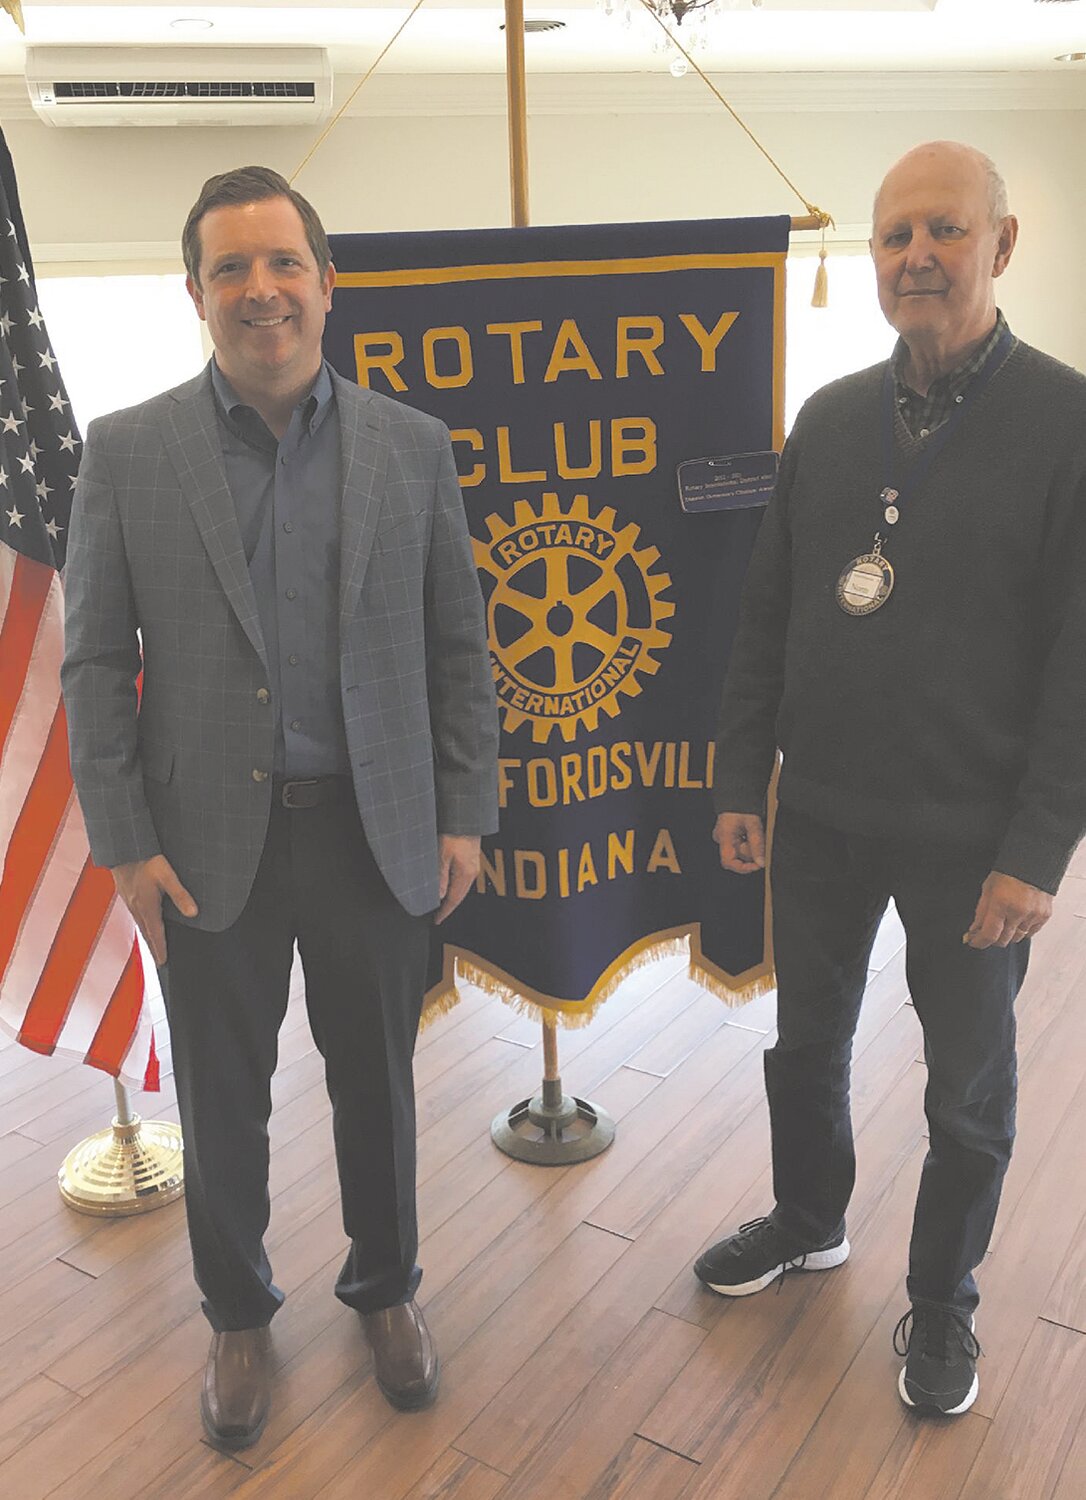 Nathan Fraser, vice president and general manager of the Crawfordsville Nucor Plant, pictured at left with Norm Reimondo, spoke recently to the Crawfordsville Rotary Club. Fraser has been with Nucor for 24 years. The Crawfordsville Plant started in 1987-1989 and employs around 758 employees. The first sheet metal plant is in Crawfordsville. Nucor is the largest steel and steel products producer in the United States. The steelmaking capacity exceeds 27 million tons annually. Nucor is the number one recycler in North America and recycles 20 million tons of ferrous scrap annually to produce new steel that is 100% recyclable. There are 2,300 steel jobs in Indiana. The median pay for all Nucor Teammates nationwide over the last three years (not including CEO) was $95,976. There were zero layoffs at any Nucor Steel  Mill in the company’s history. Every Nucor teammate and their dependents are eligible to receive a $3,500-per-year scholarship to college or vocational school. Nearly $110 million has been awarded nationwide since the program’s inception in 1974. There are 27,000 teammates working safely at more than 300 operating facilities in North America.